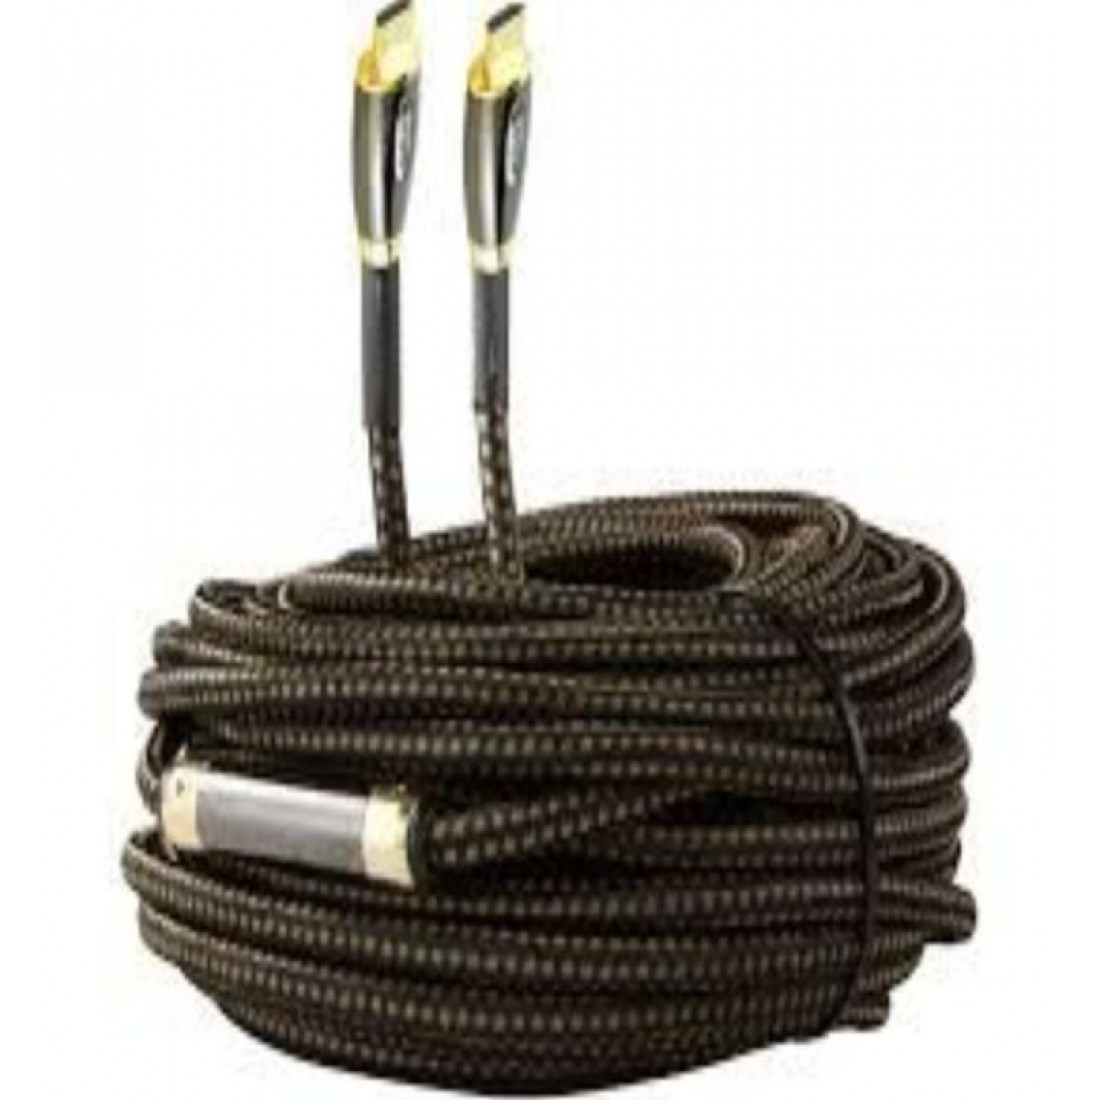 50 mtr HDMI NYLON BREADED WITH AMPLIFIER CABLE